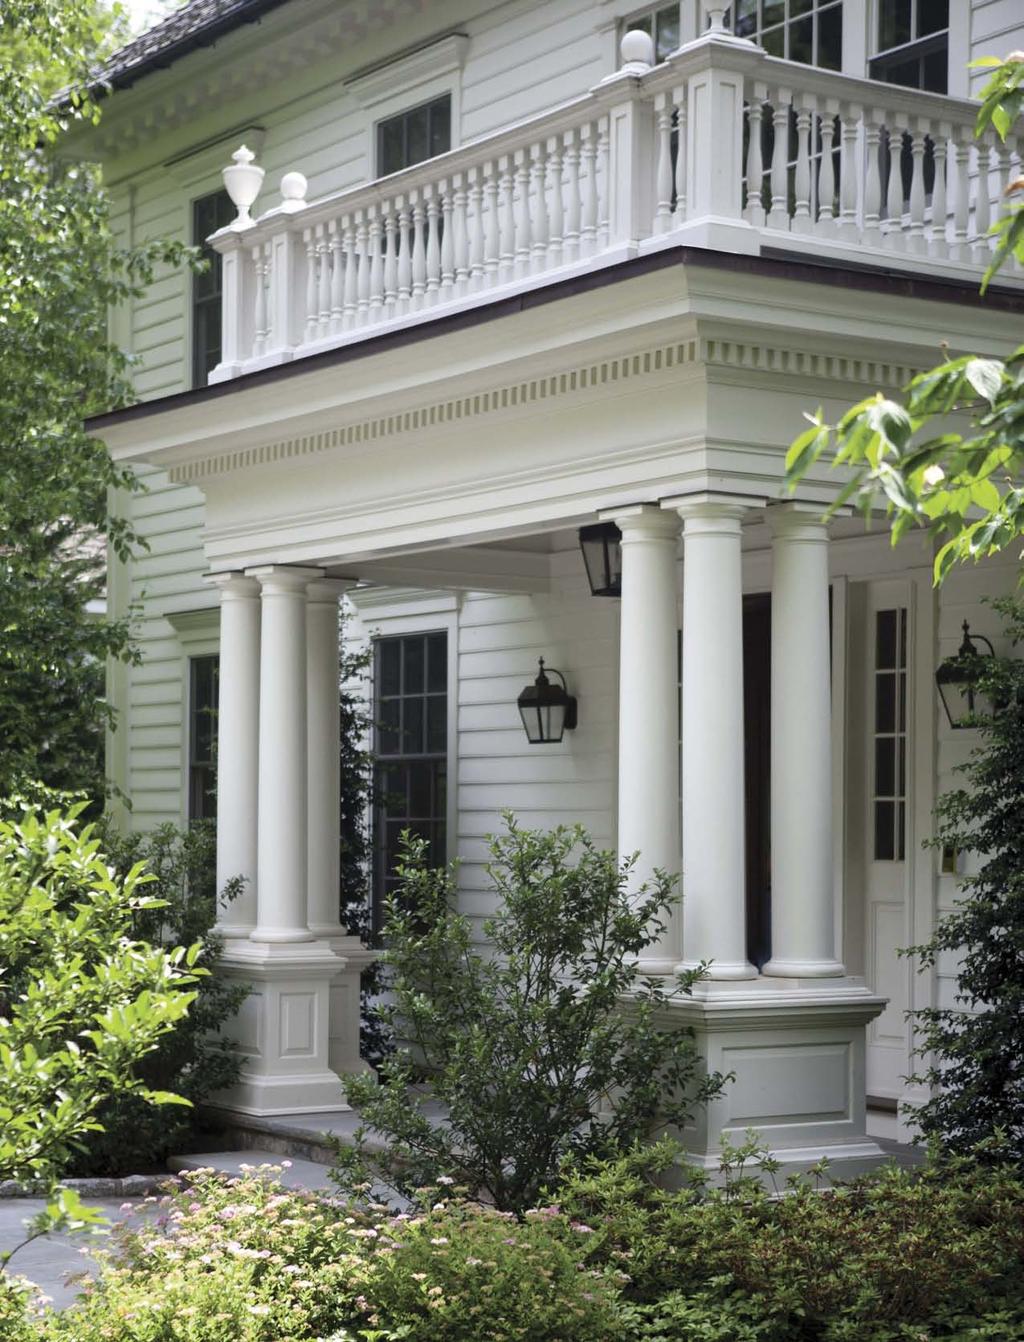 Strong architectural details adorn the front portico.